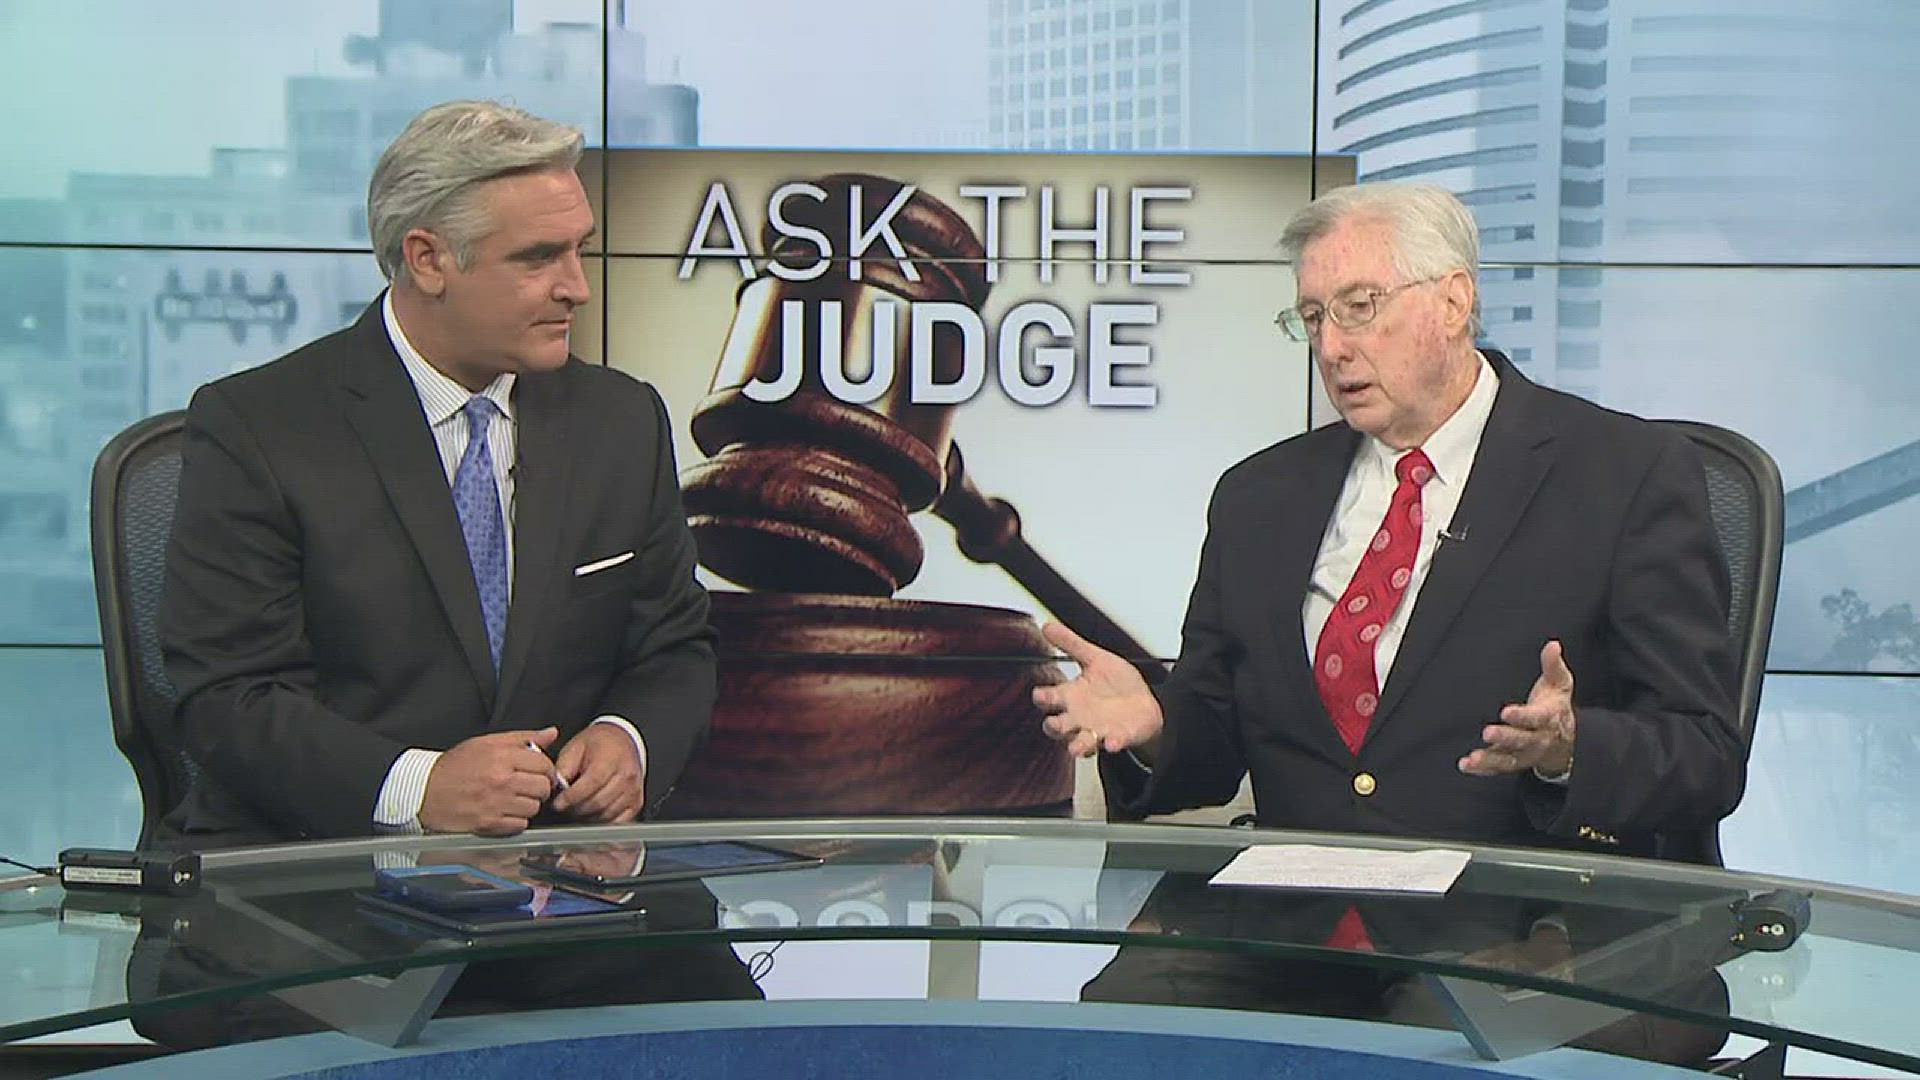 From custody questions, domestic violence questions, and statutory rape questions, Judge Larry Thorne has the answers. You can send Ask the Judge questions to 12news@12newsnow.com